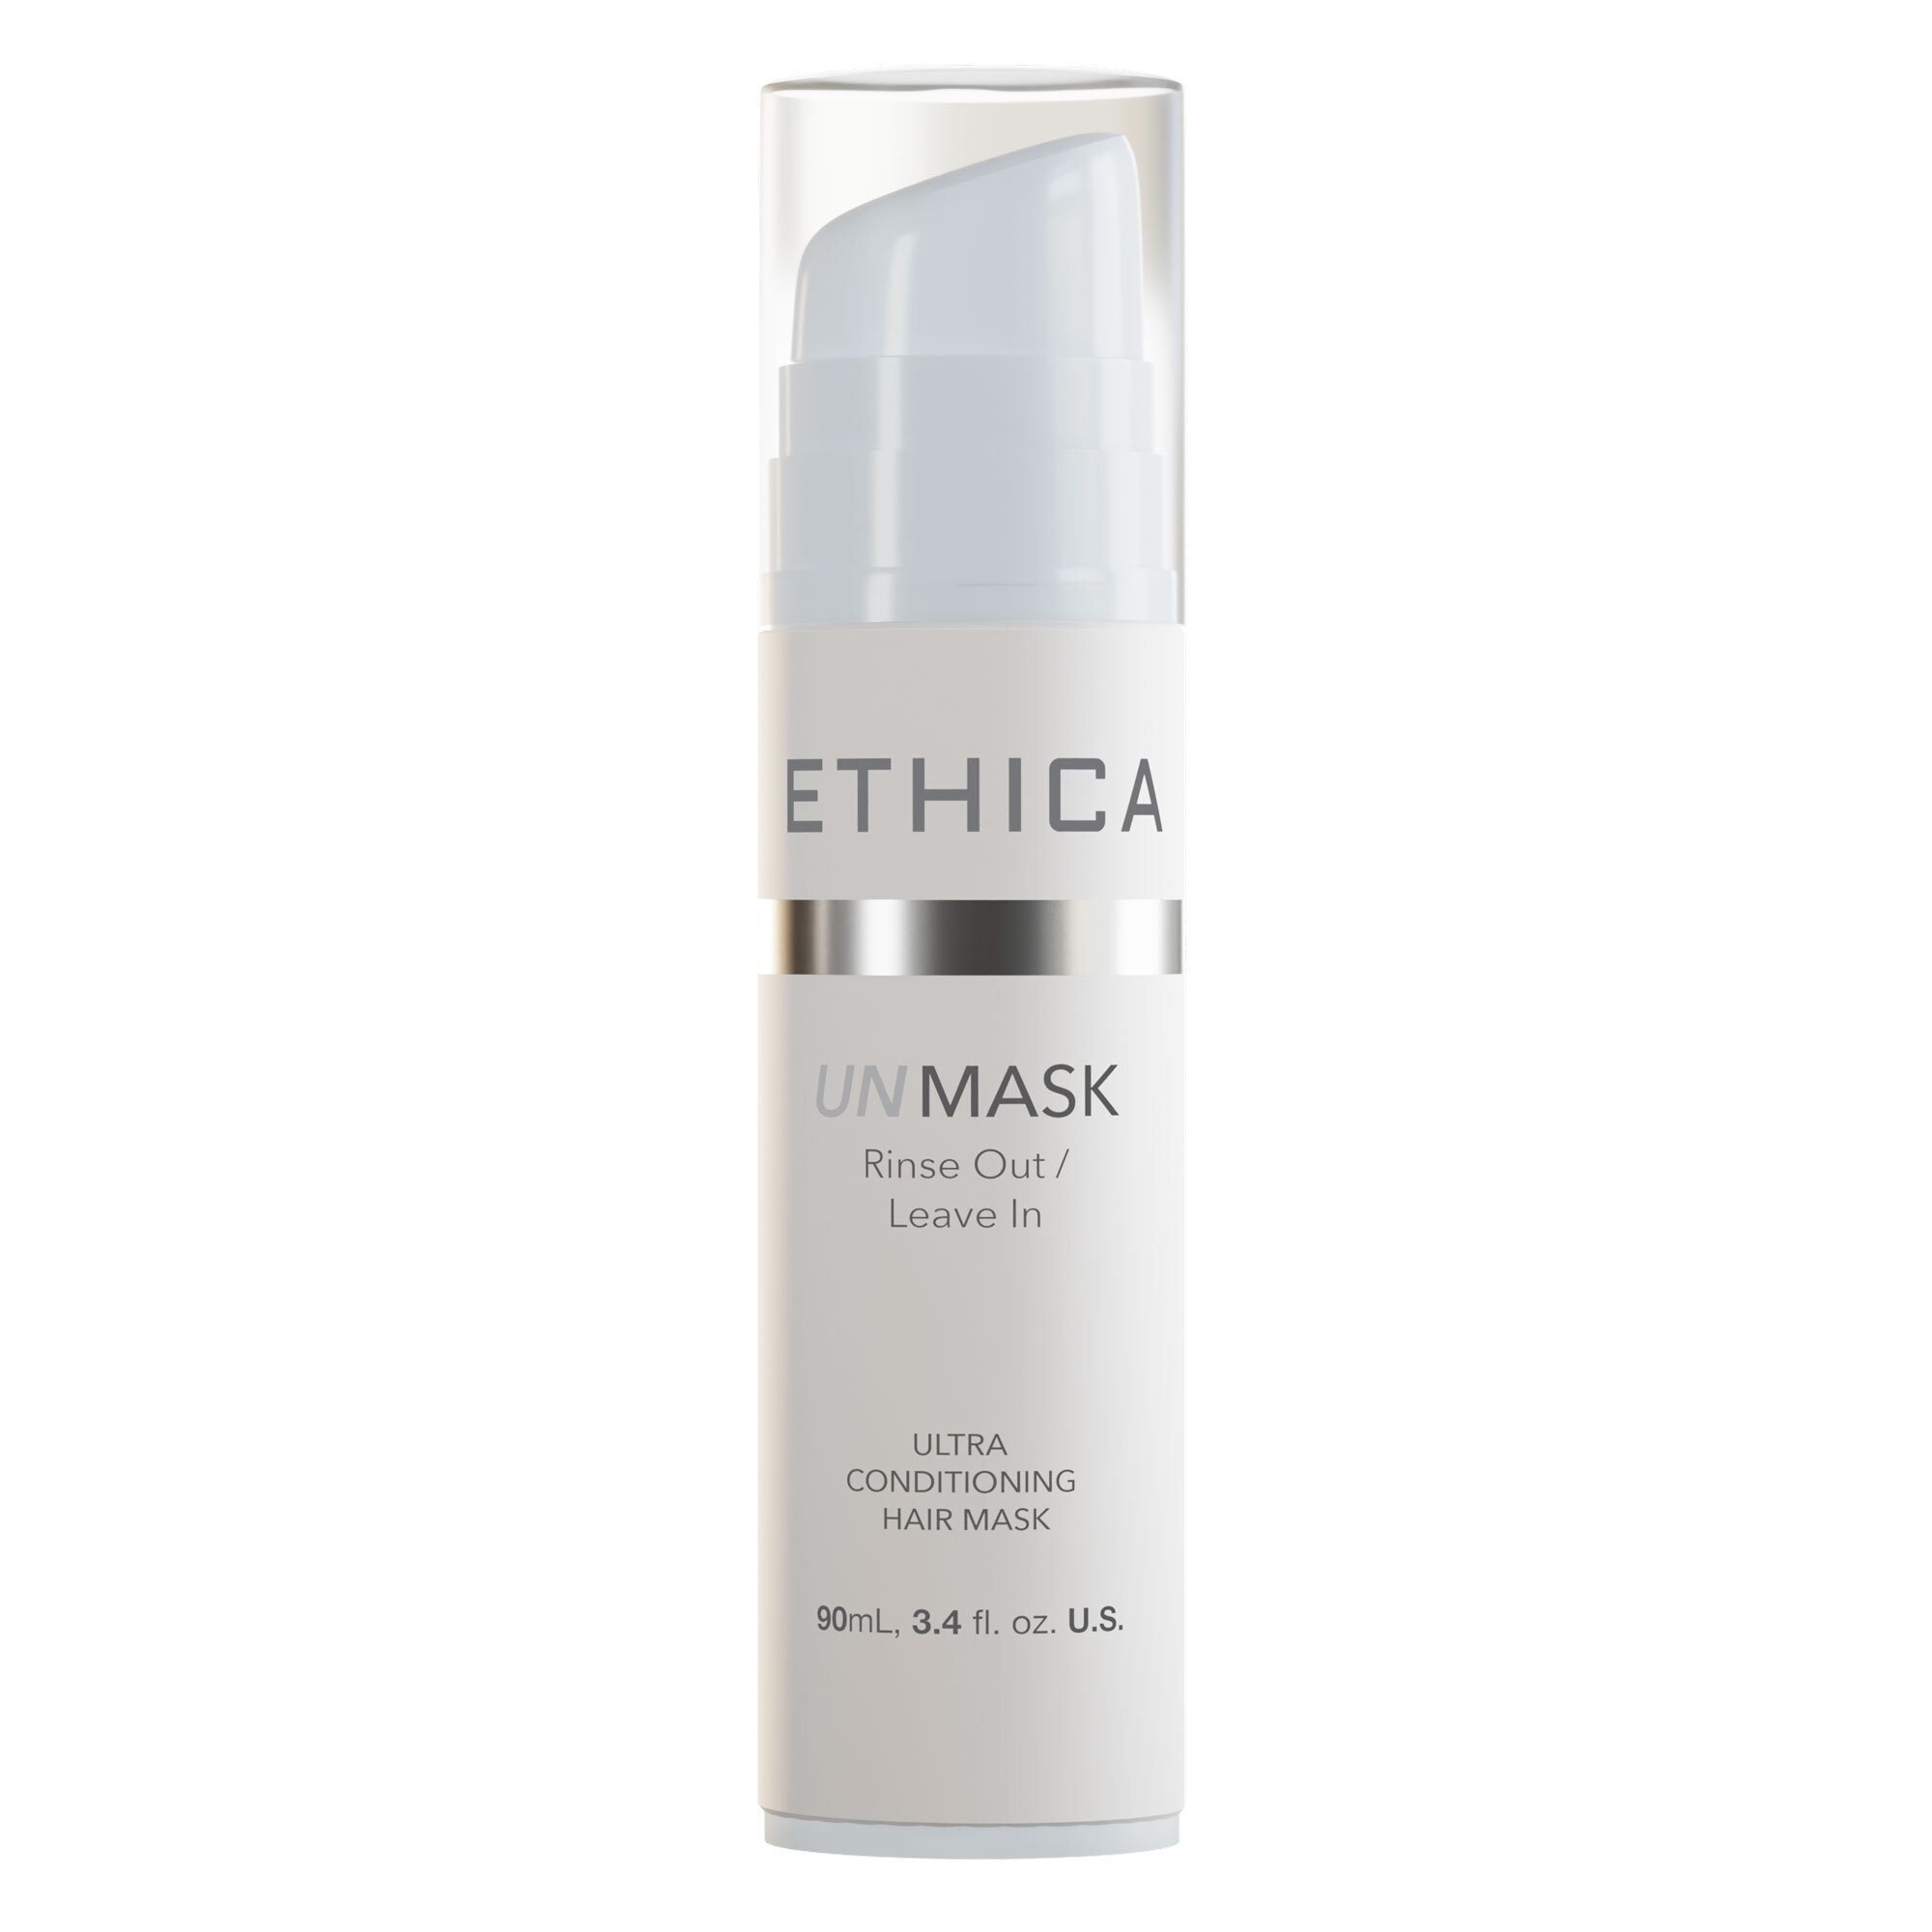 Ethica UNMASK Ultra Conditioning Mask